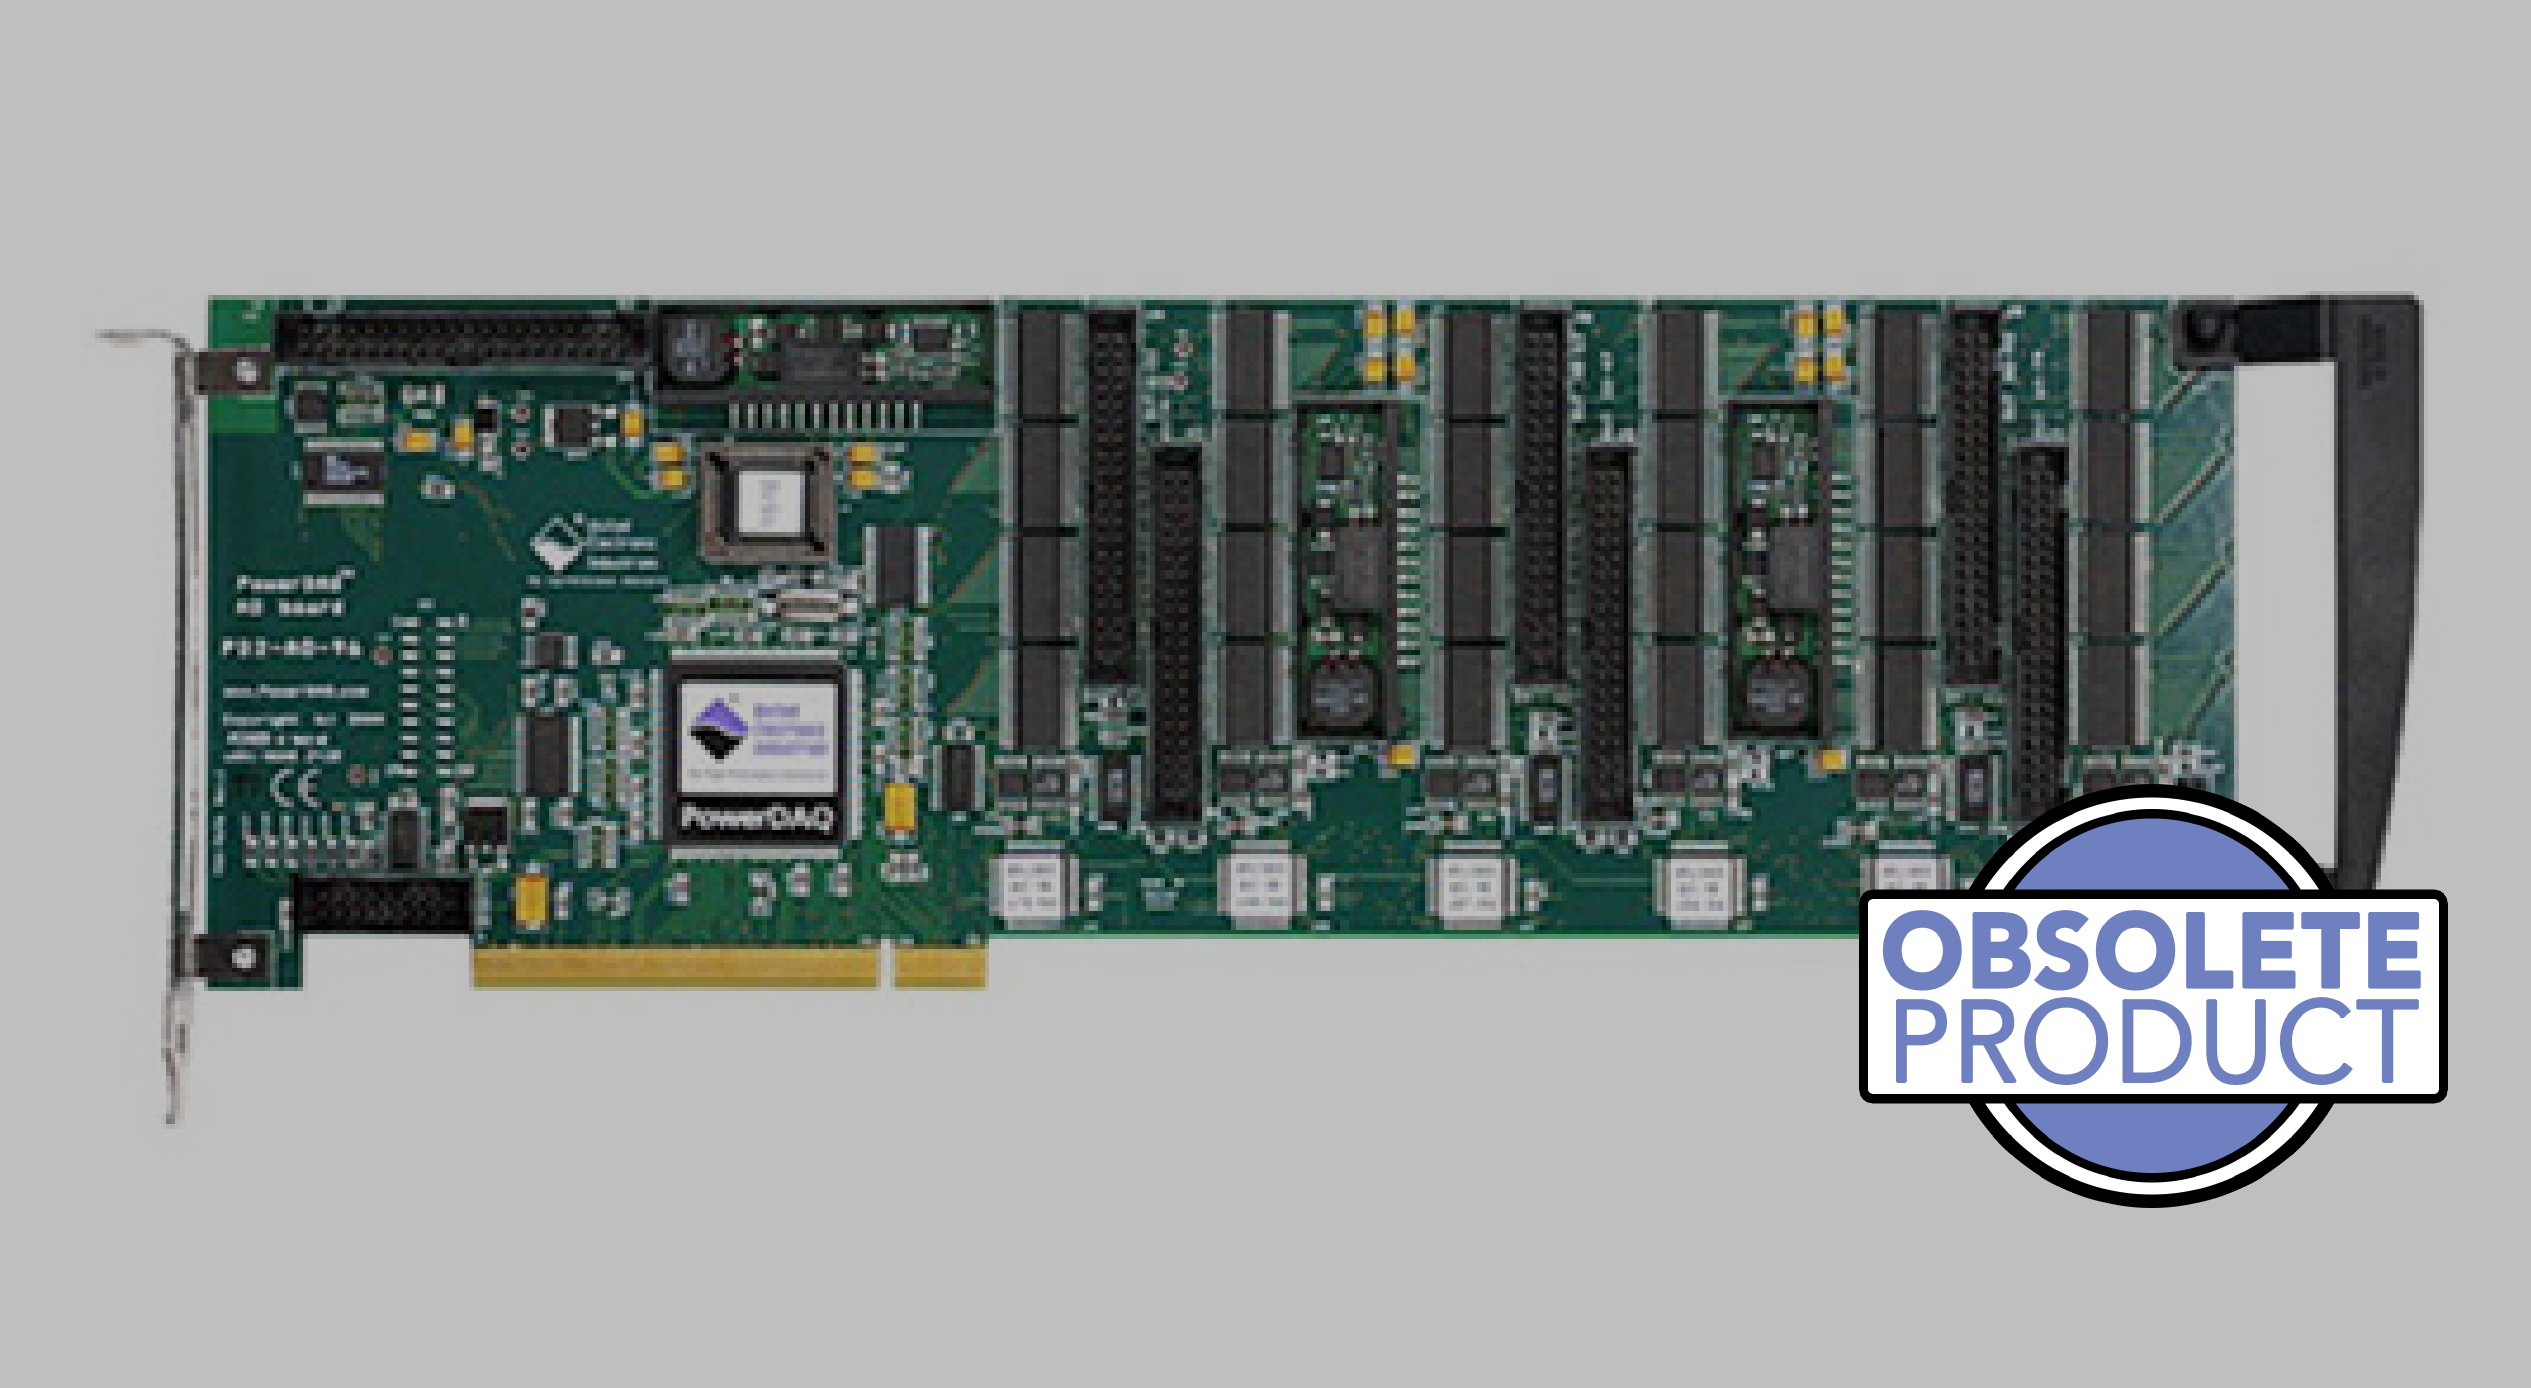 96-channel, 16-bit, 100 kS/s per channel, high-speed PCI analog output board